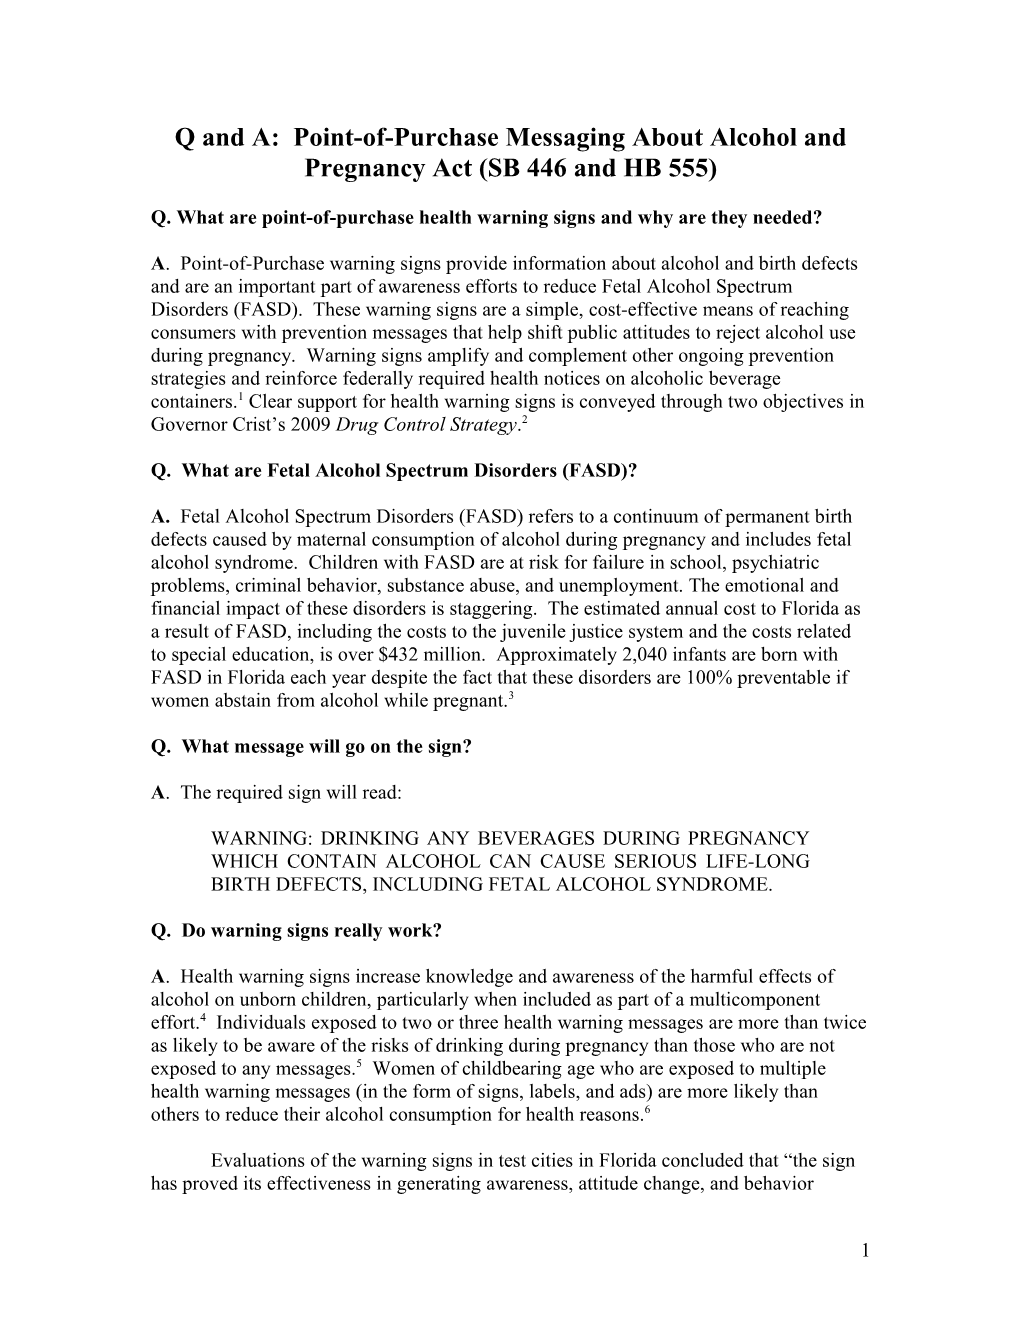 Questions and Answers Regarding the Point-Of-Purchase Messaging About Alcohol and Pregnancy Act